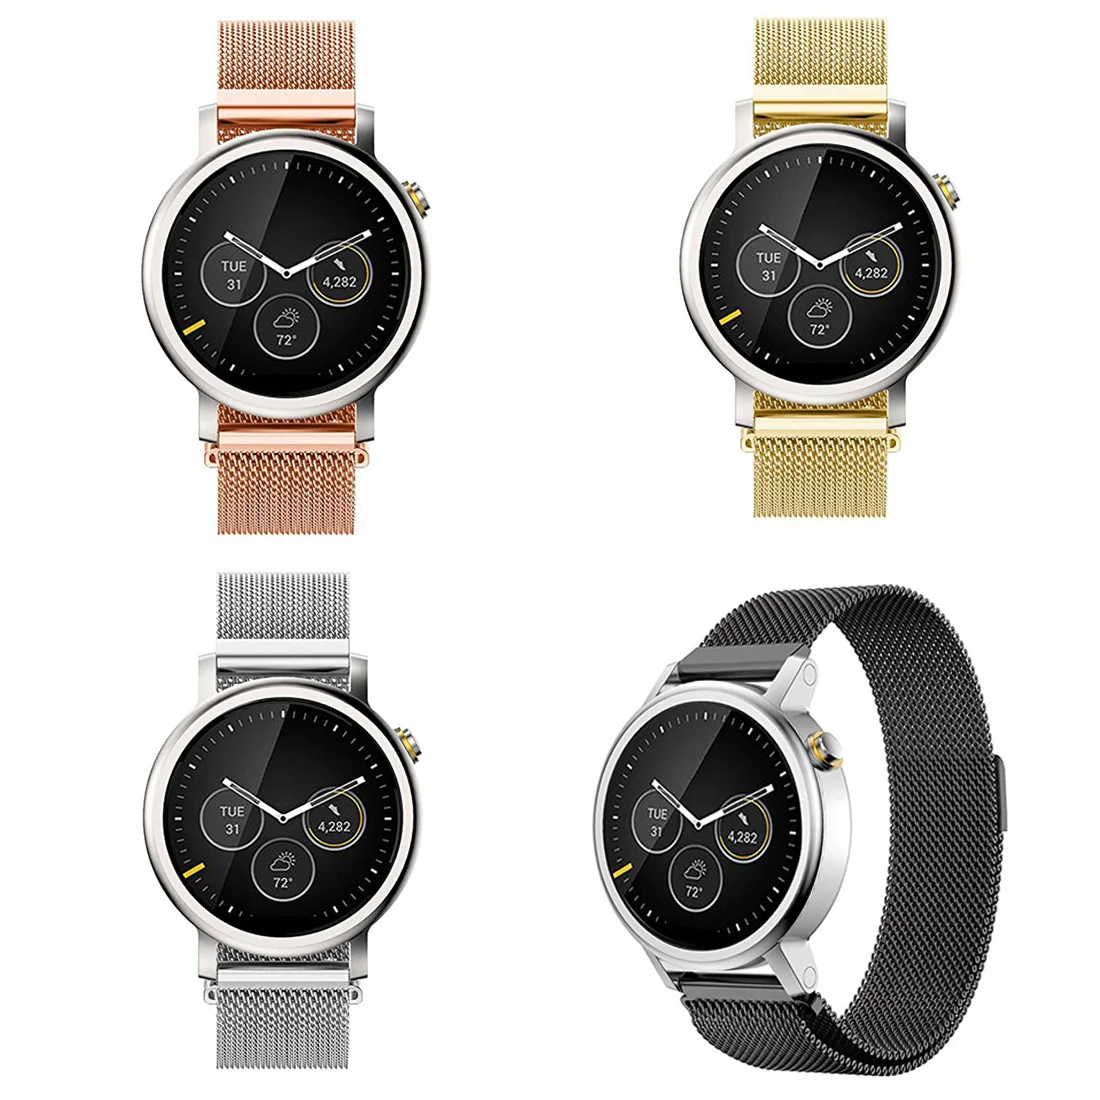 

2018 New Stainless Steel Fashion Strap For Moto 360 Second Generation Milanese Strap 42mm Dial Casual Fashion Couple Strap